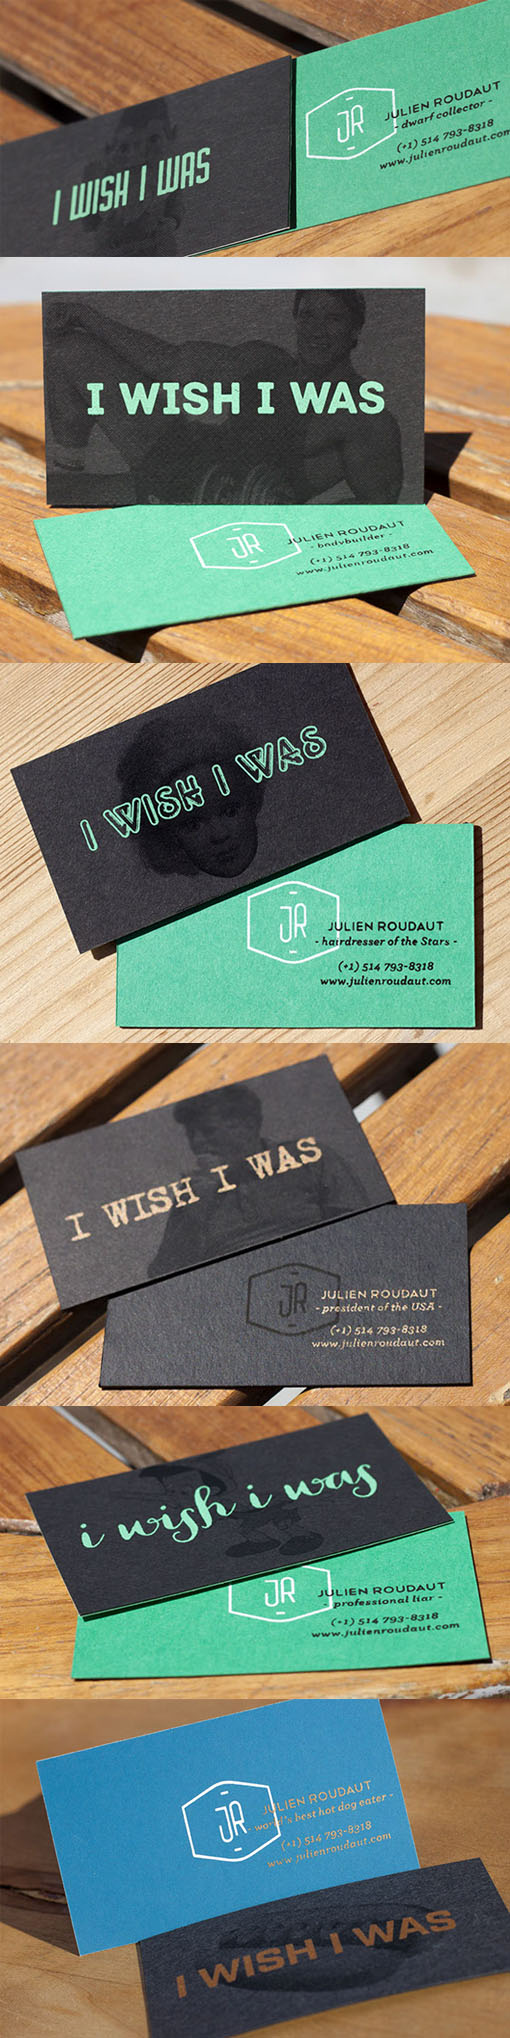 Quirky And Humorous Business Cards With Great Typography For An Art Director